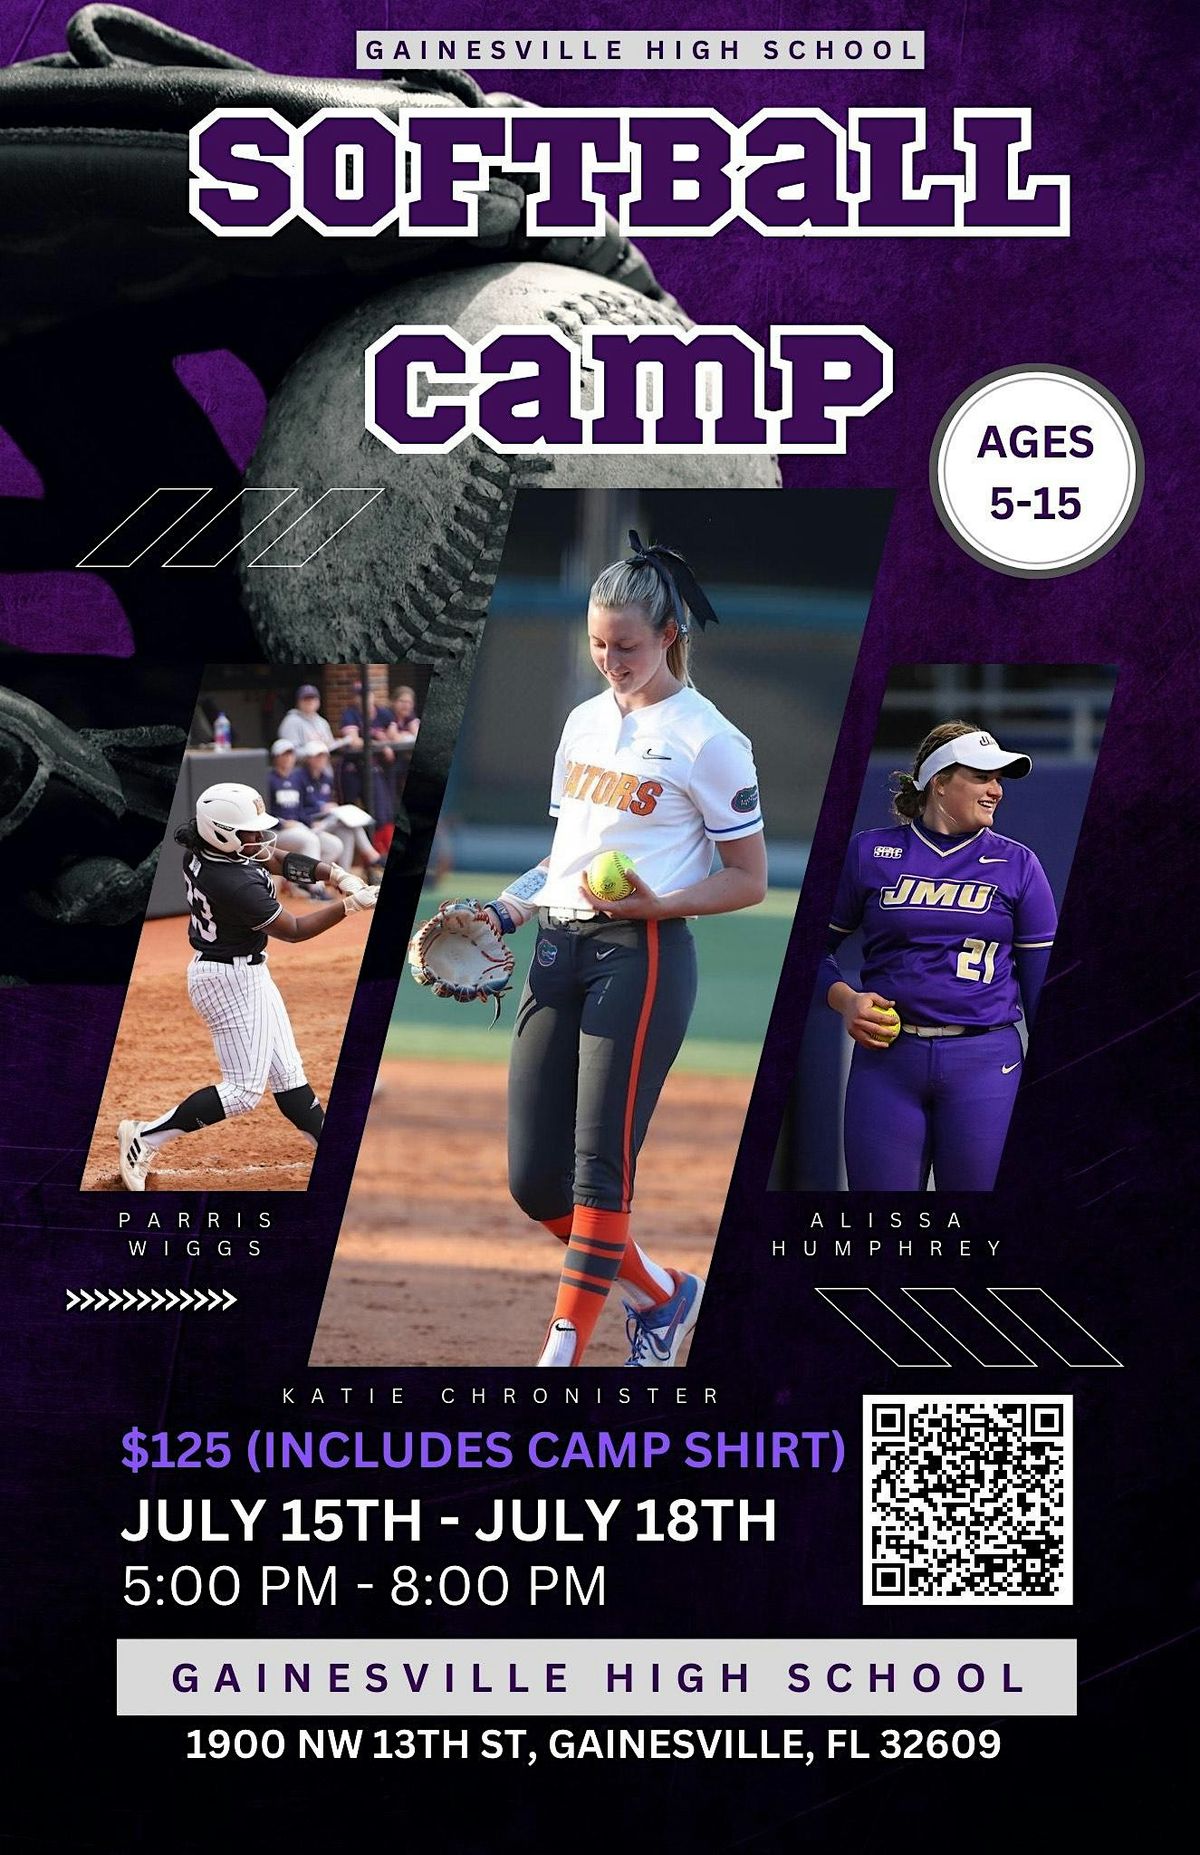 Gainesville High School's 2nd Annual Youth Softball Camp